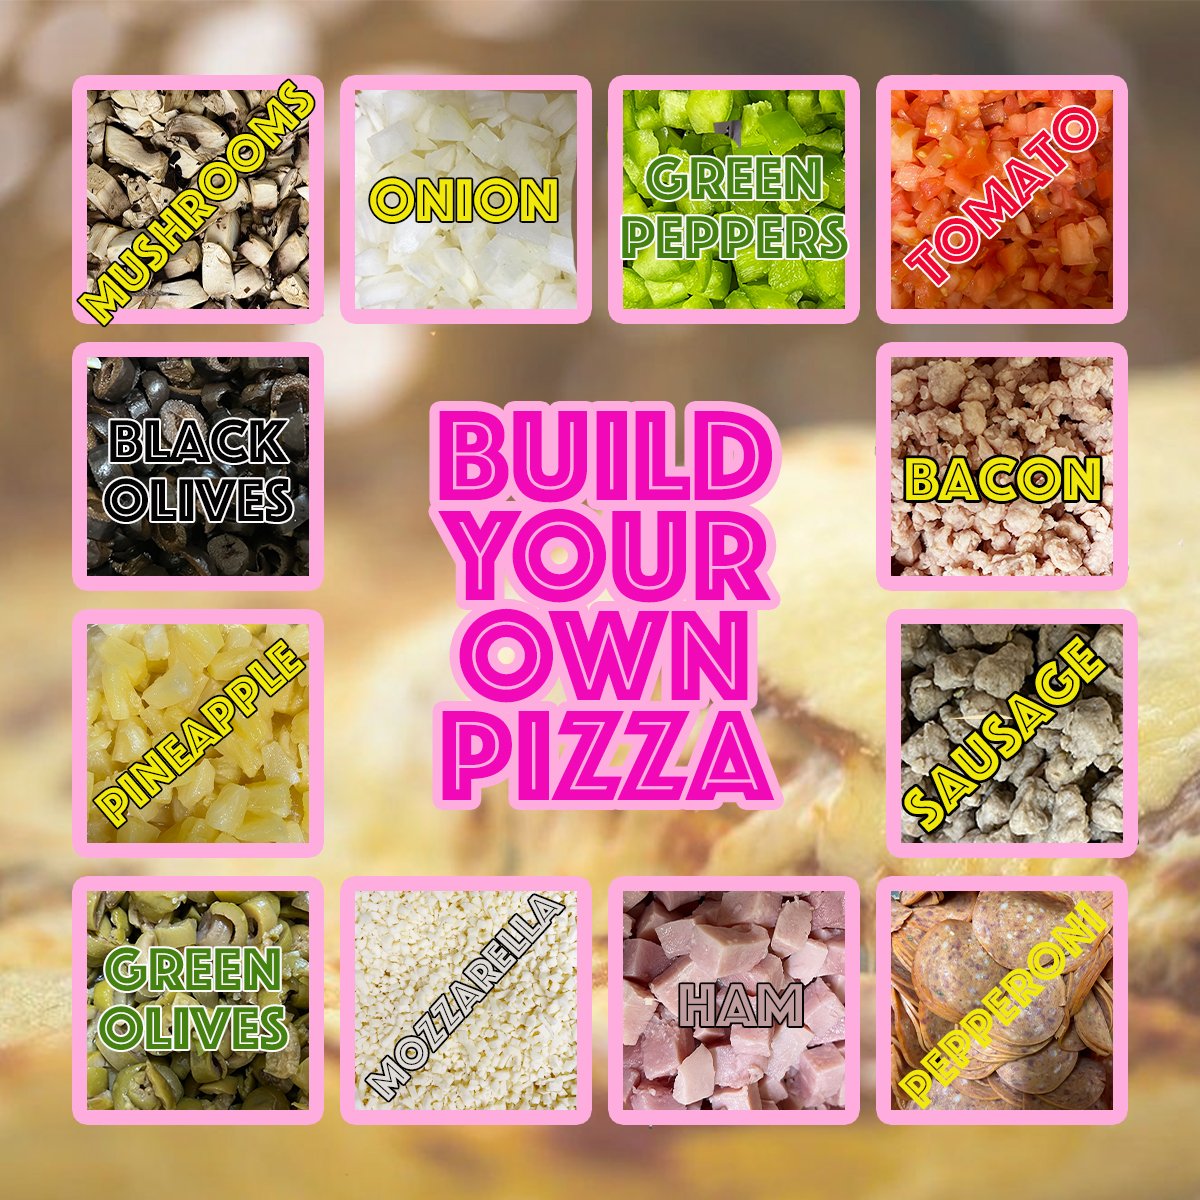 Build Your Own Pizza.jpg